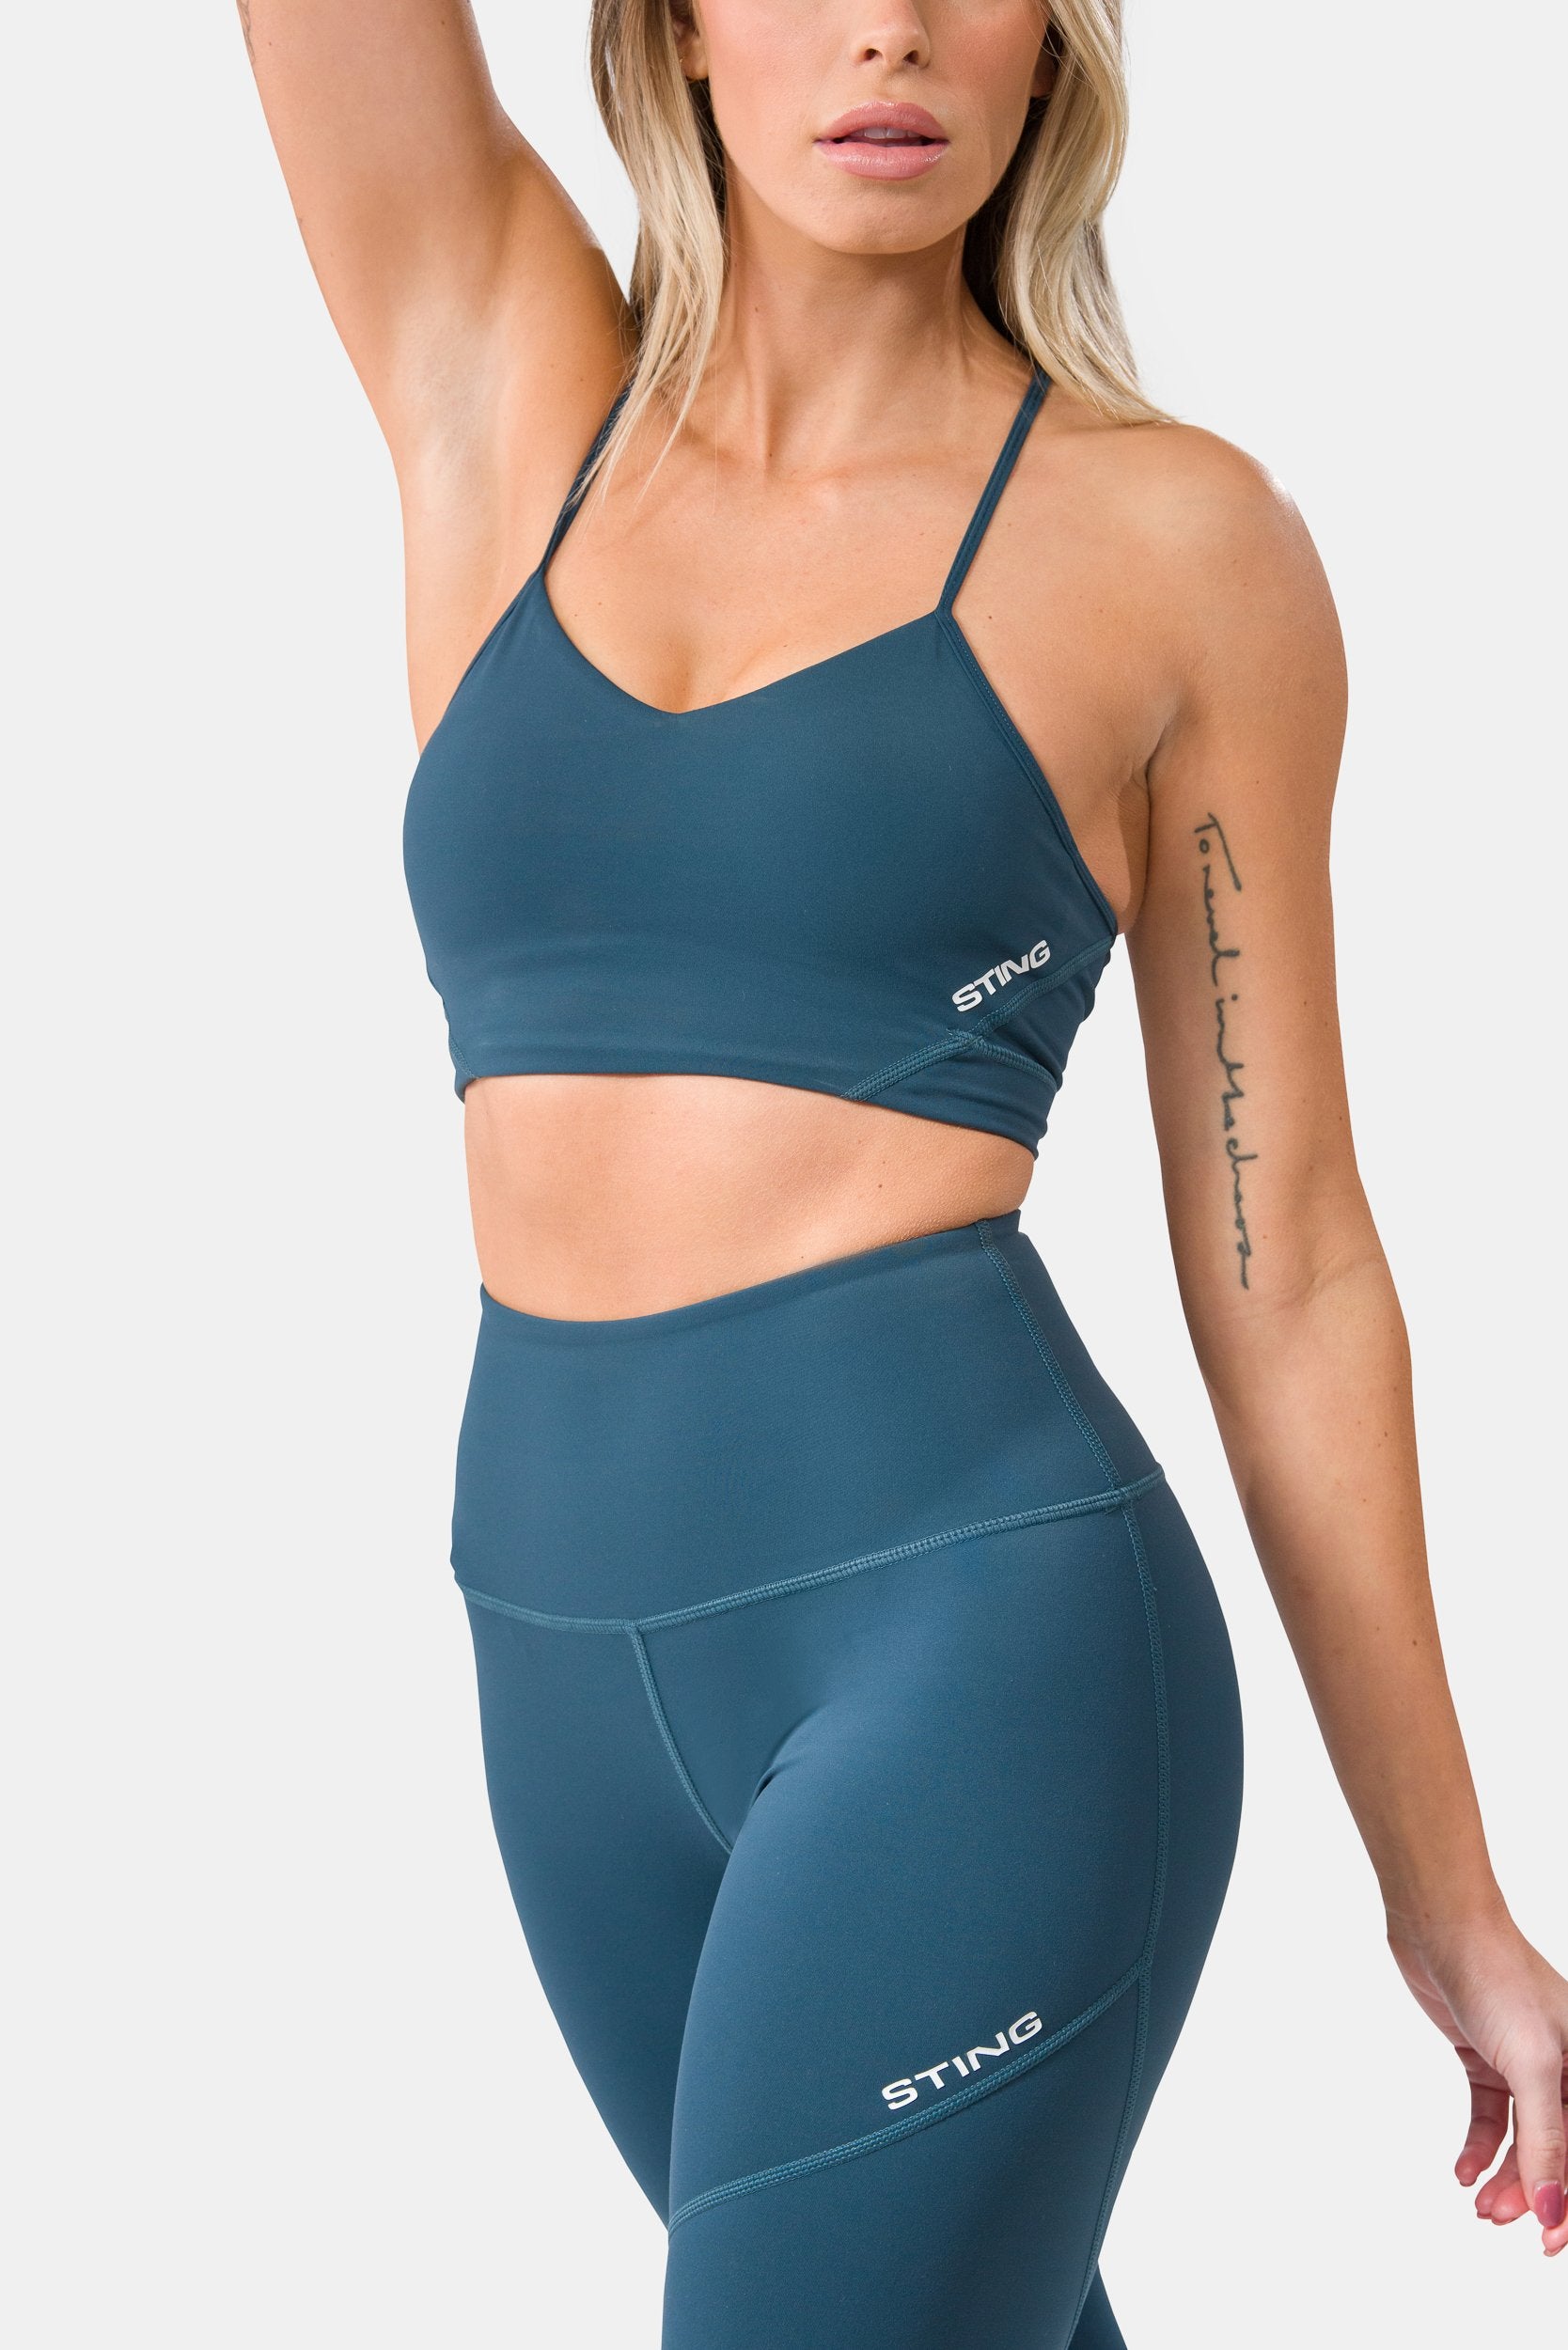 Women's Activewear & Workout Clothes for Women  Sports Wear For Women – Sting  Sports Canada ᵀᴹ